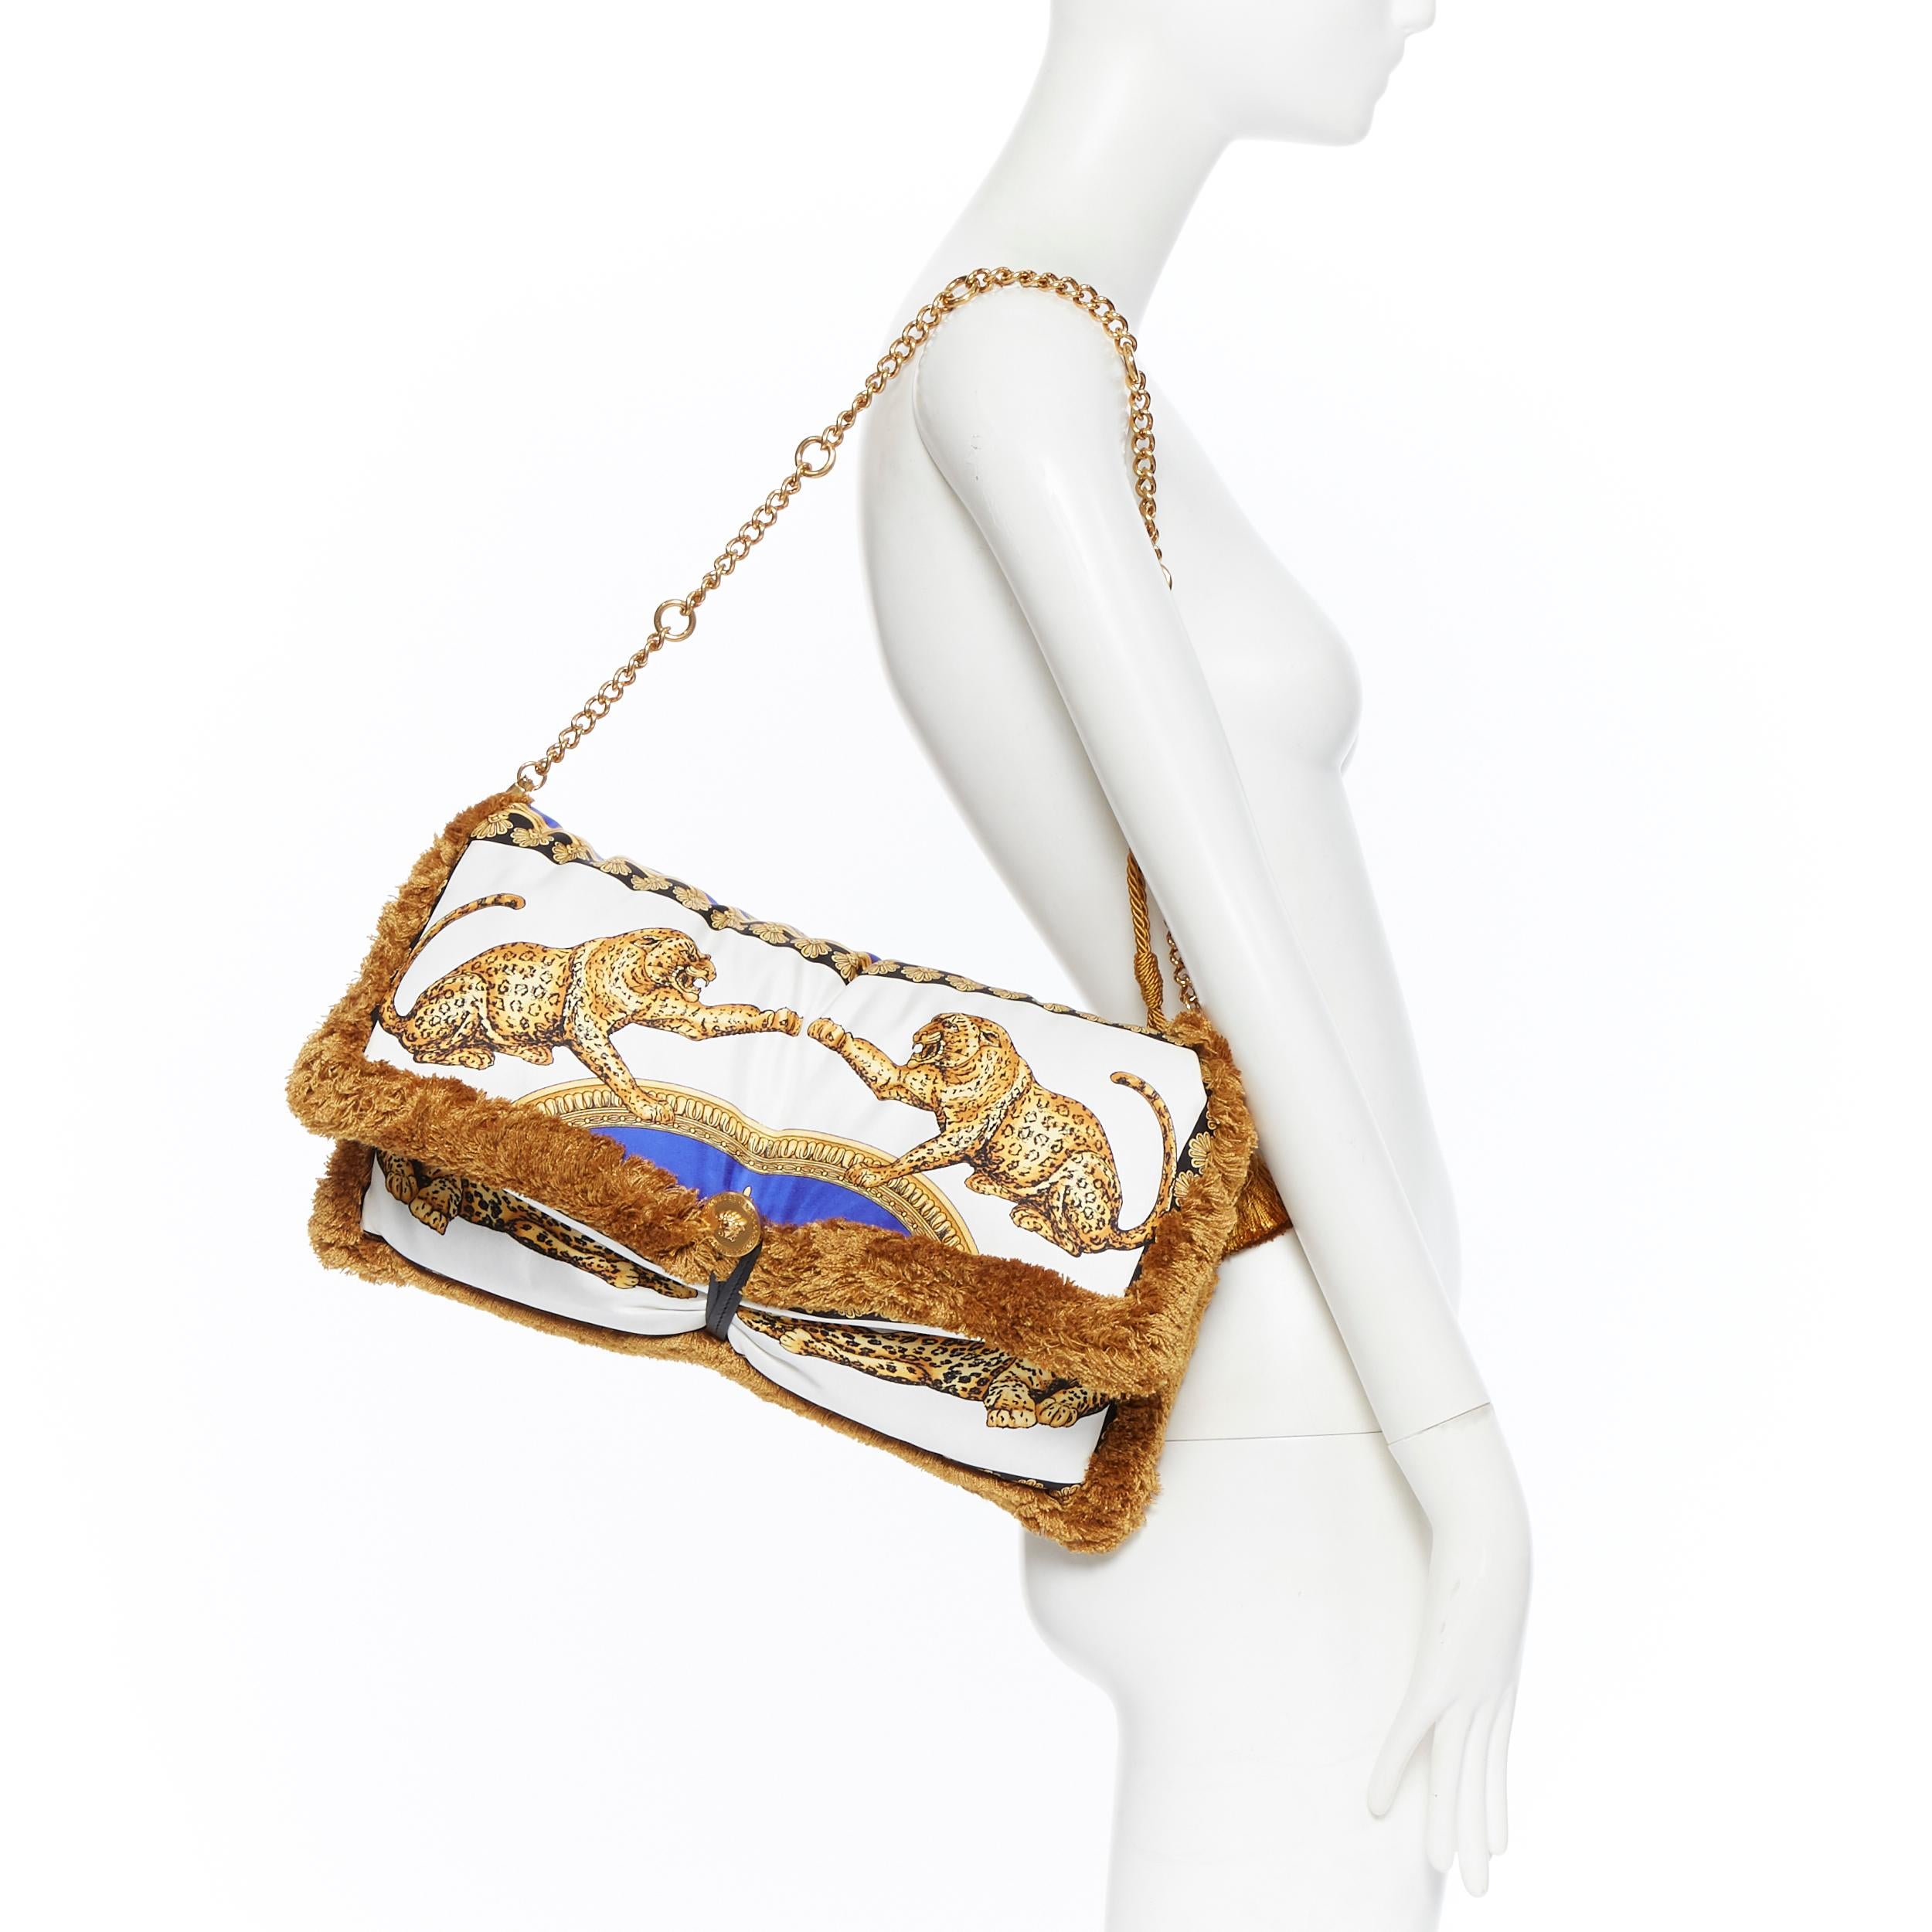 new VERSACE 2018 Runway Pillow Talk baroque leopard silk tassel shoulder bag
Brand: Versace
Designer: Donatella Versace
Collection: Pre Fall 2018
Model Name / Style: Pillow Talk
Material: Silk
Color: White; gold and blue
Pattern: Leopard
Closure: